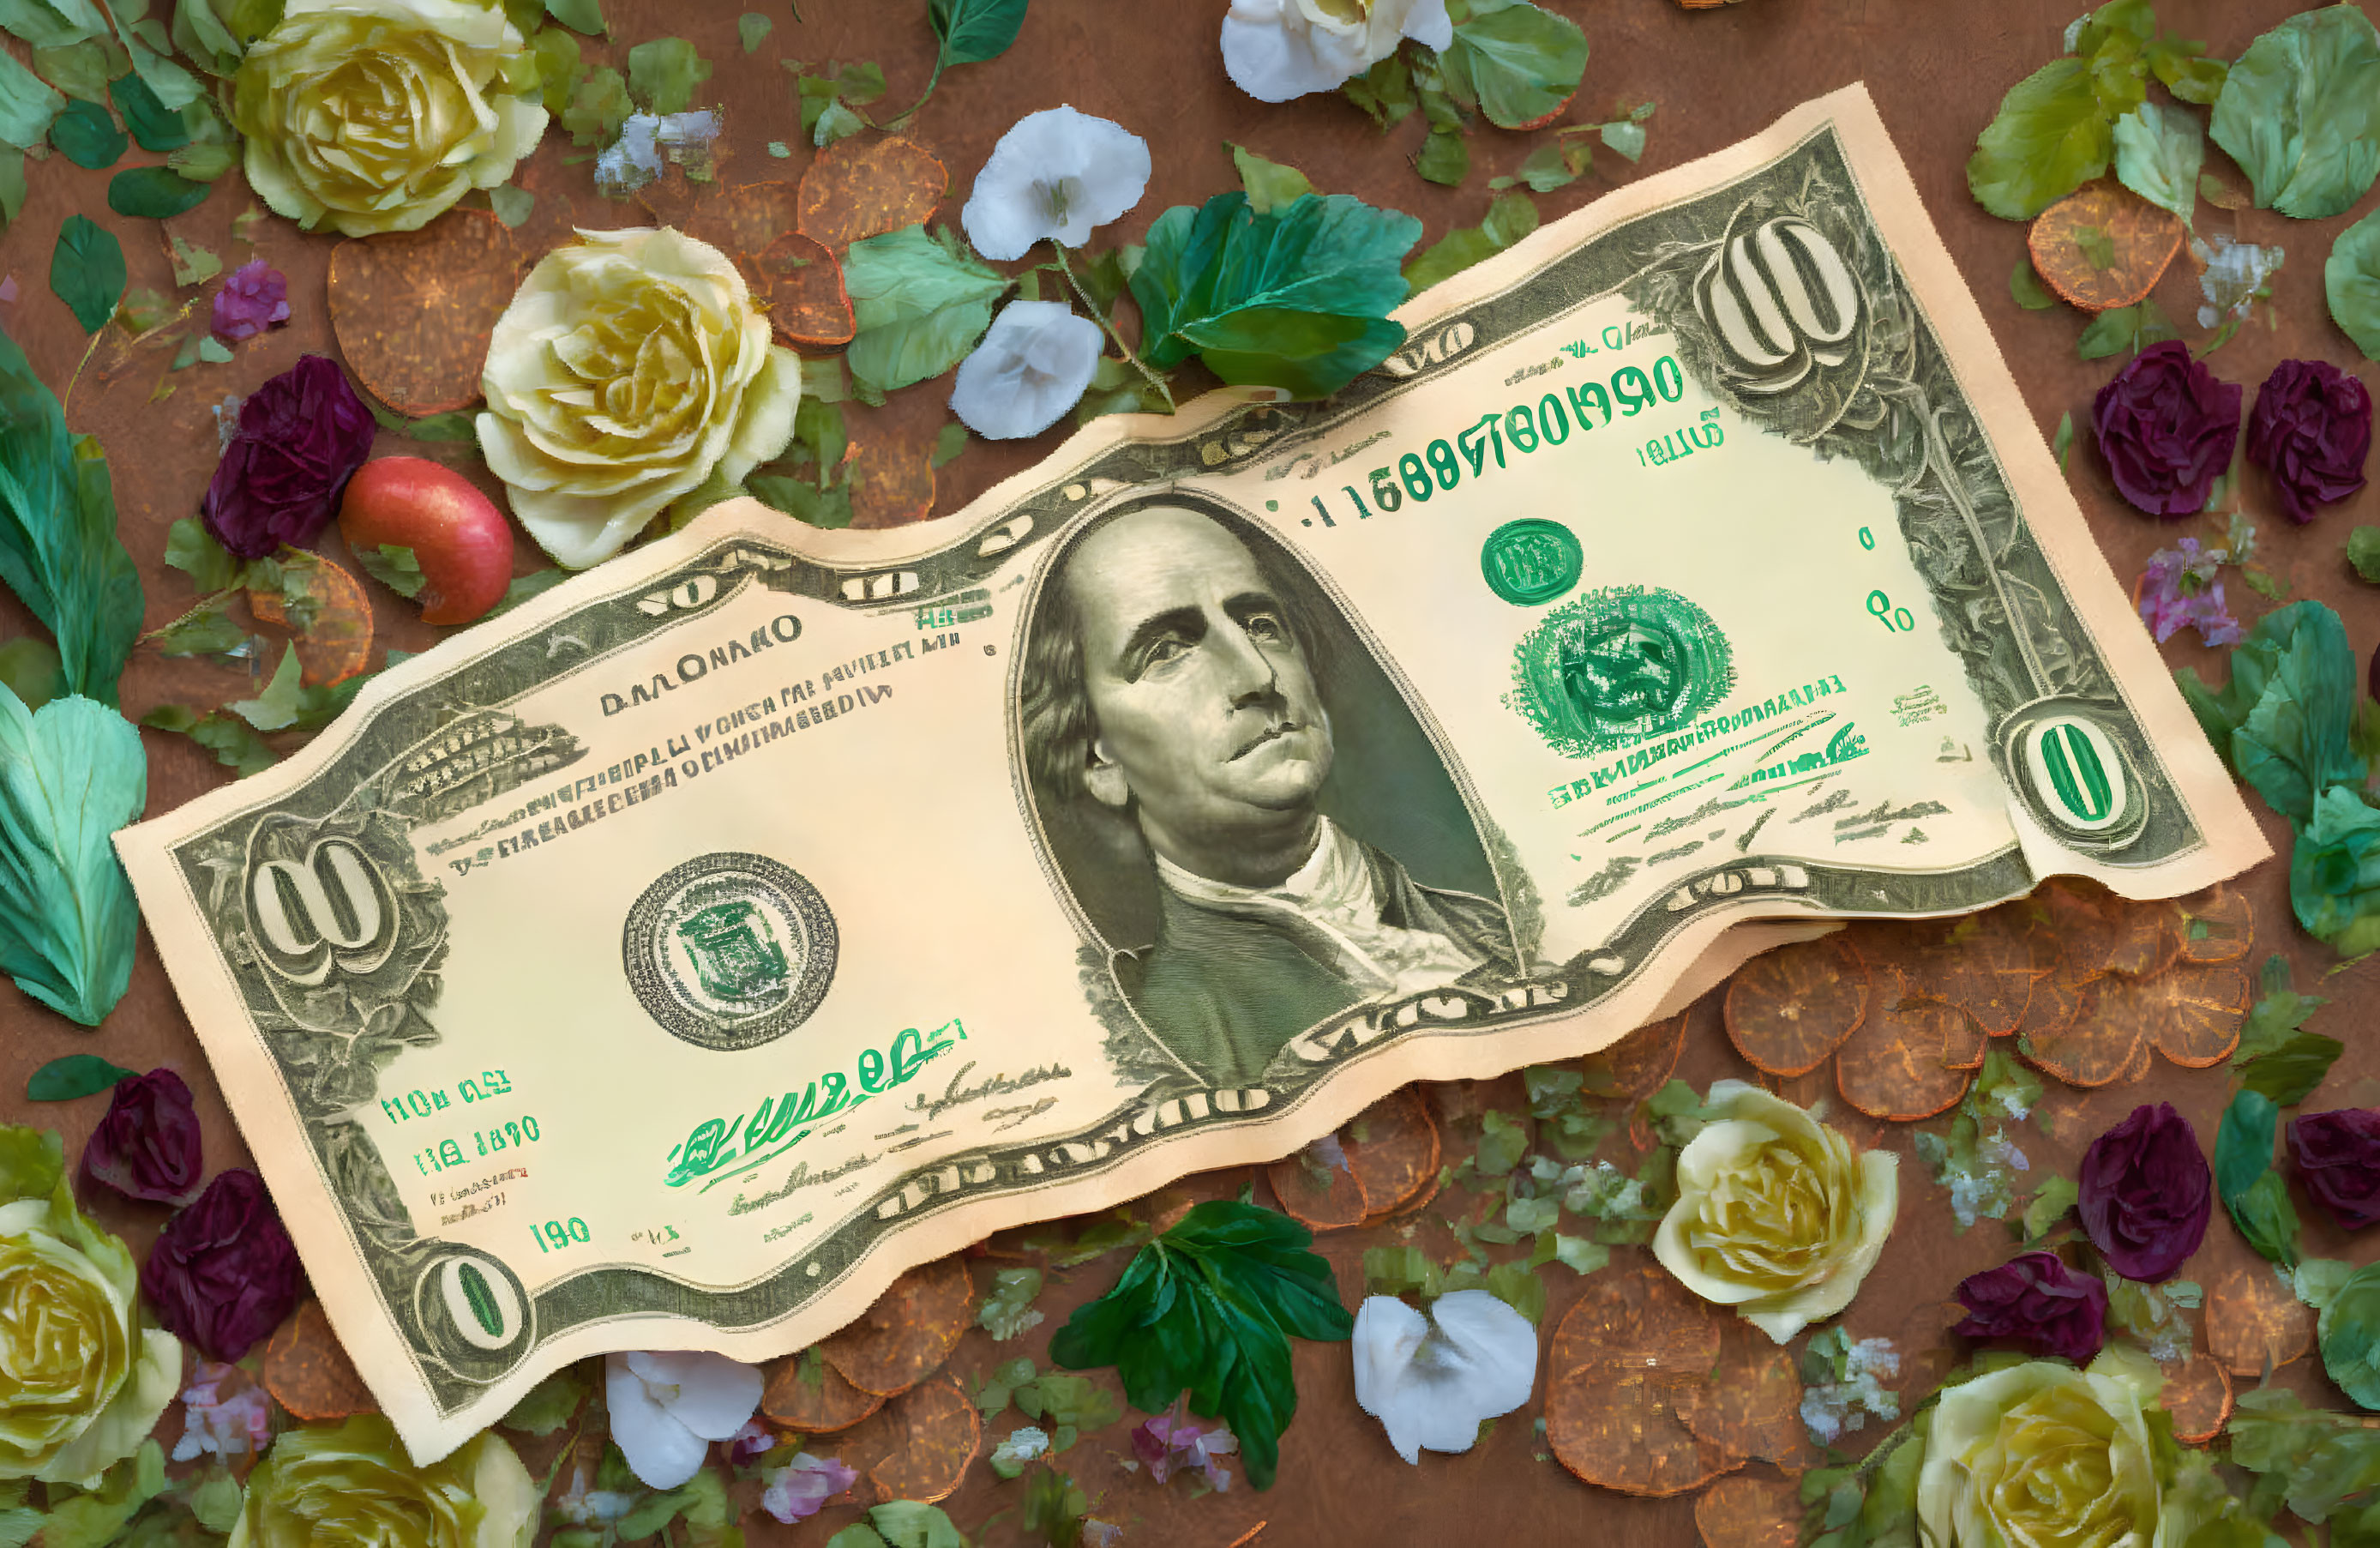 Colorful Artificial Roses Surrounding One Hundred Dollar Bill